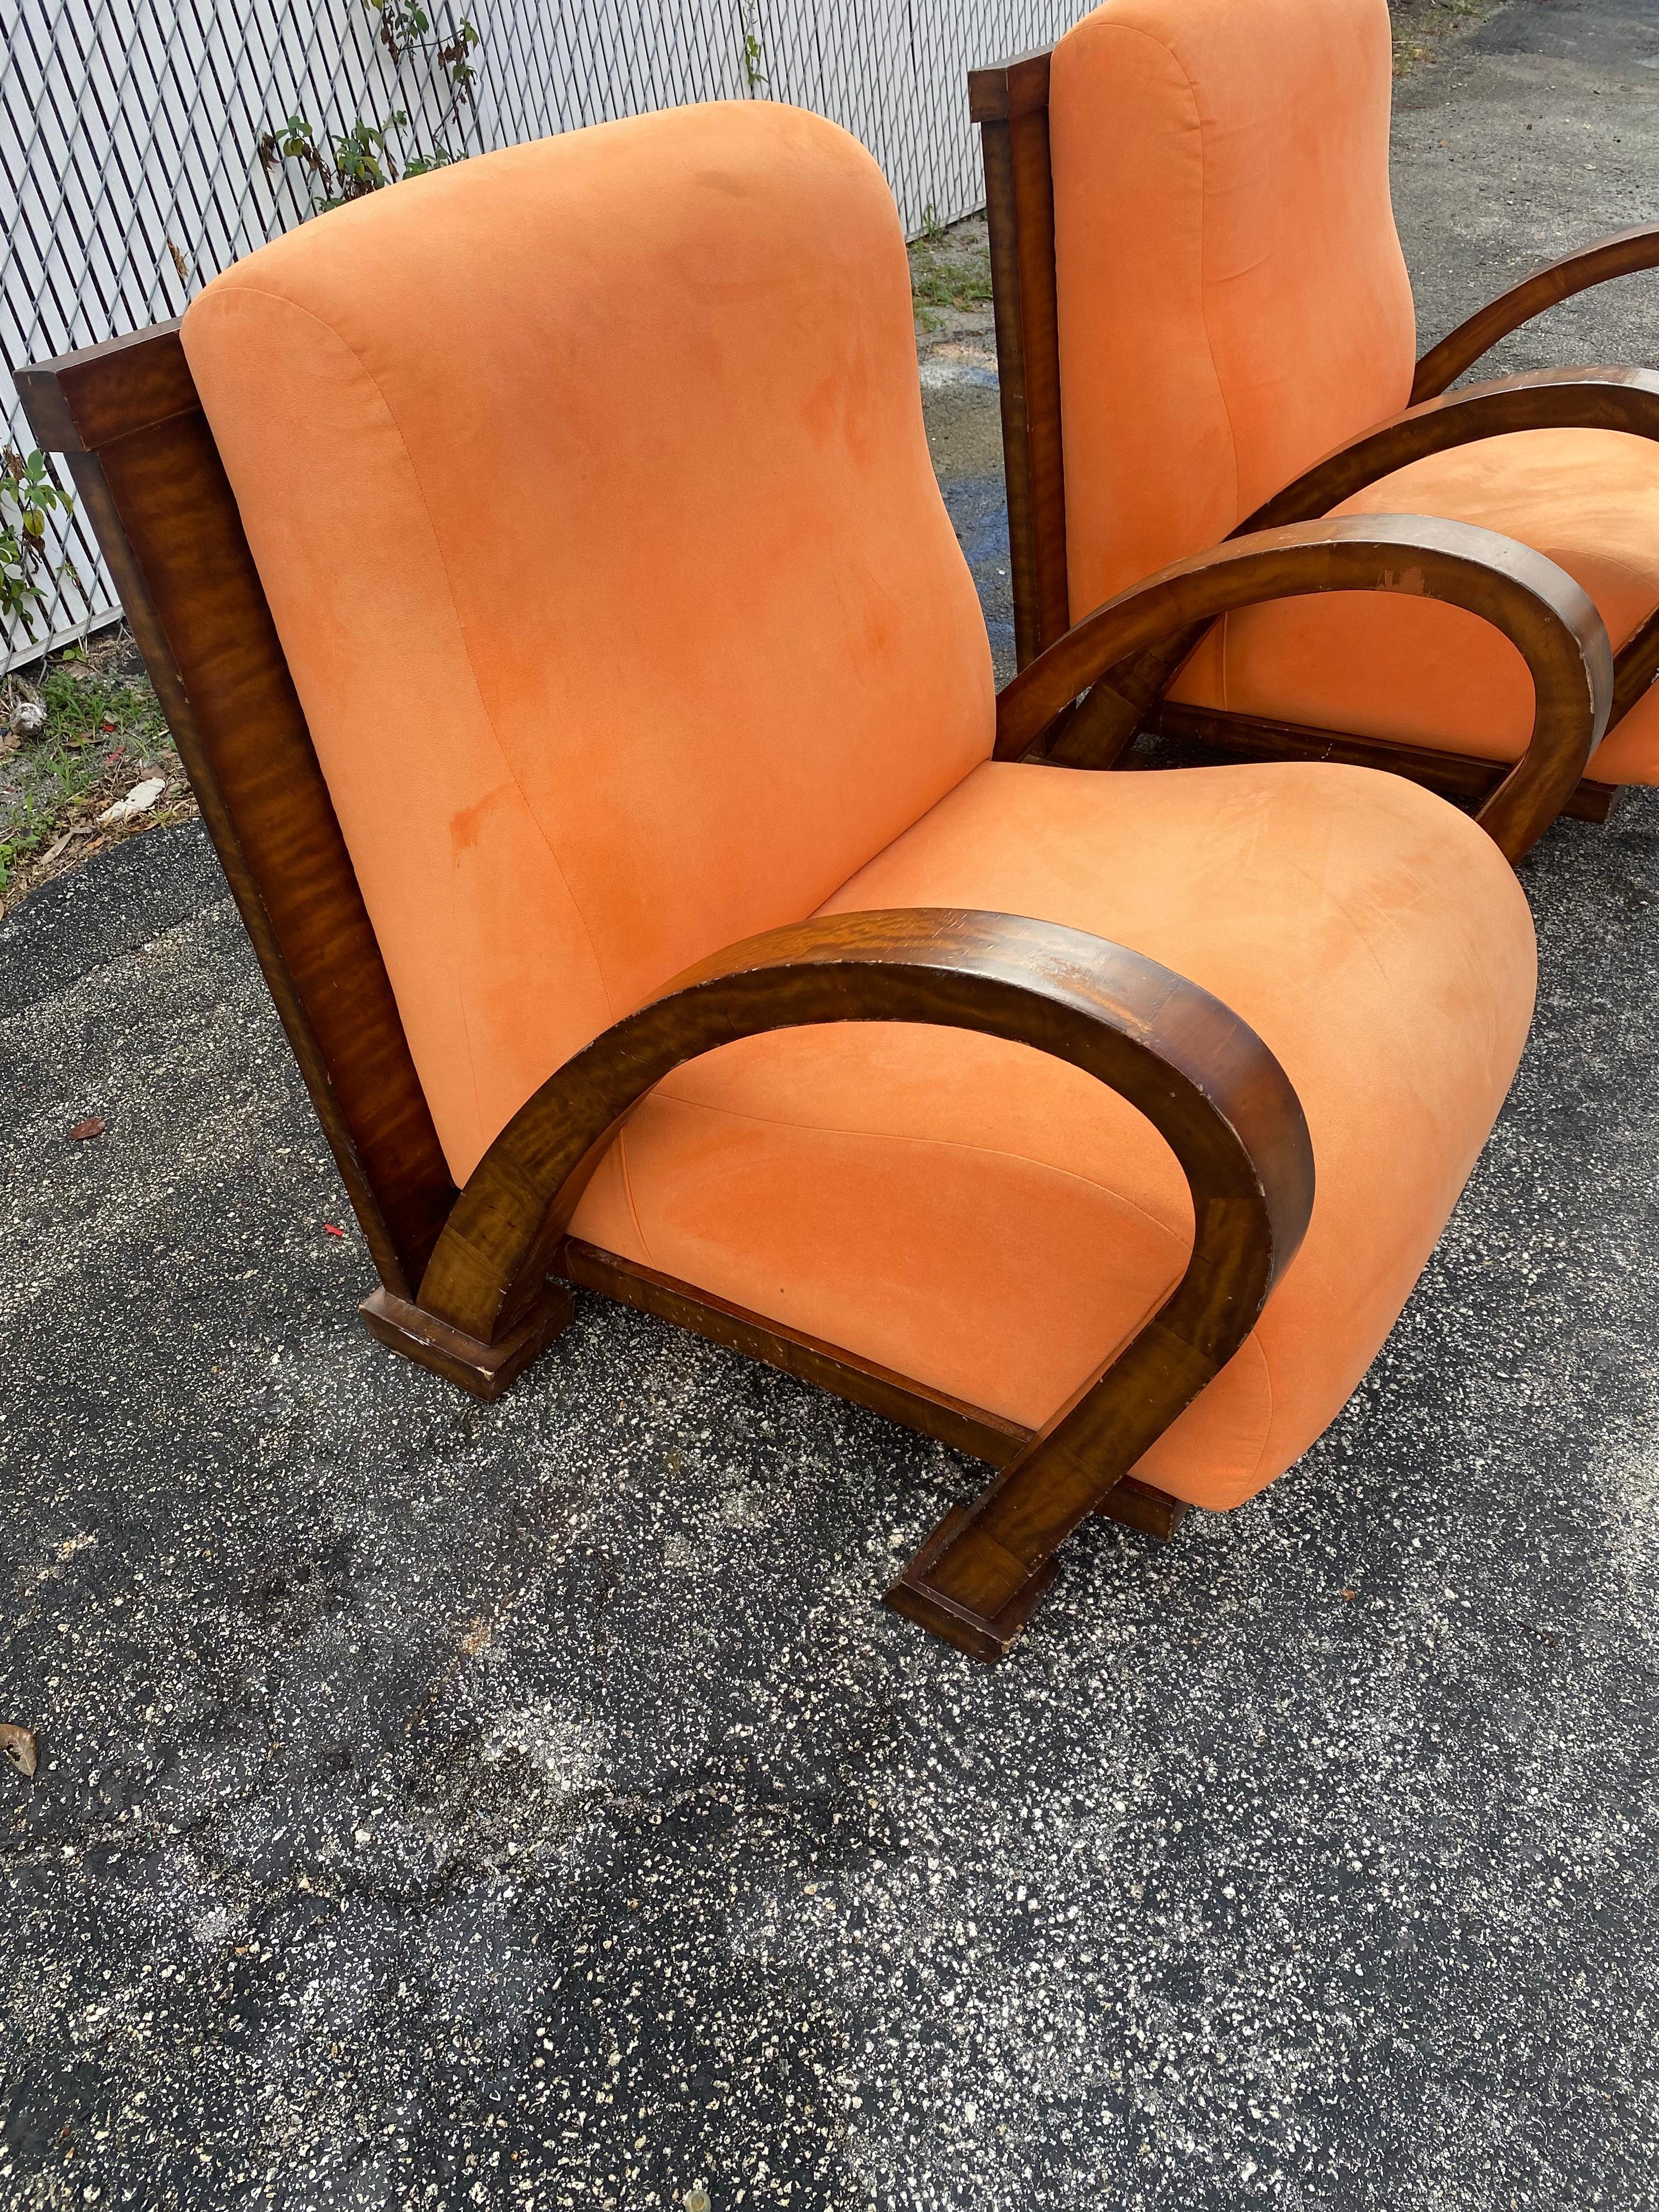 Upholstery 1930s Walnut Orange Art Deco Bentwood Chairs, Set of 2 For Sale